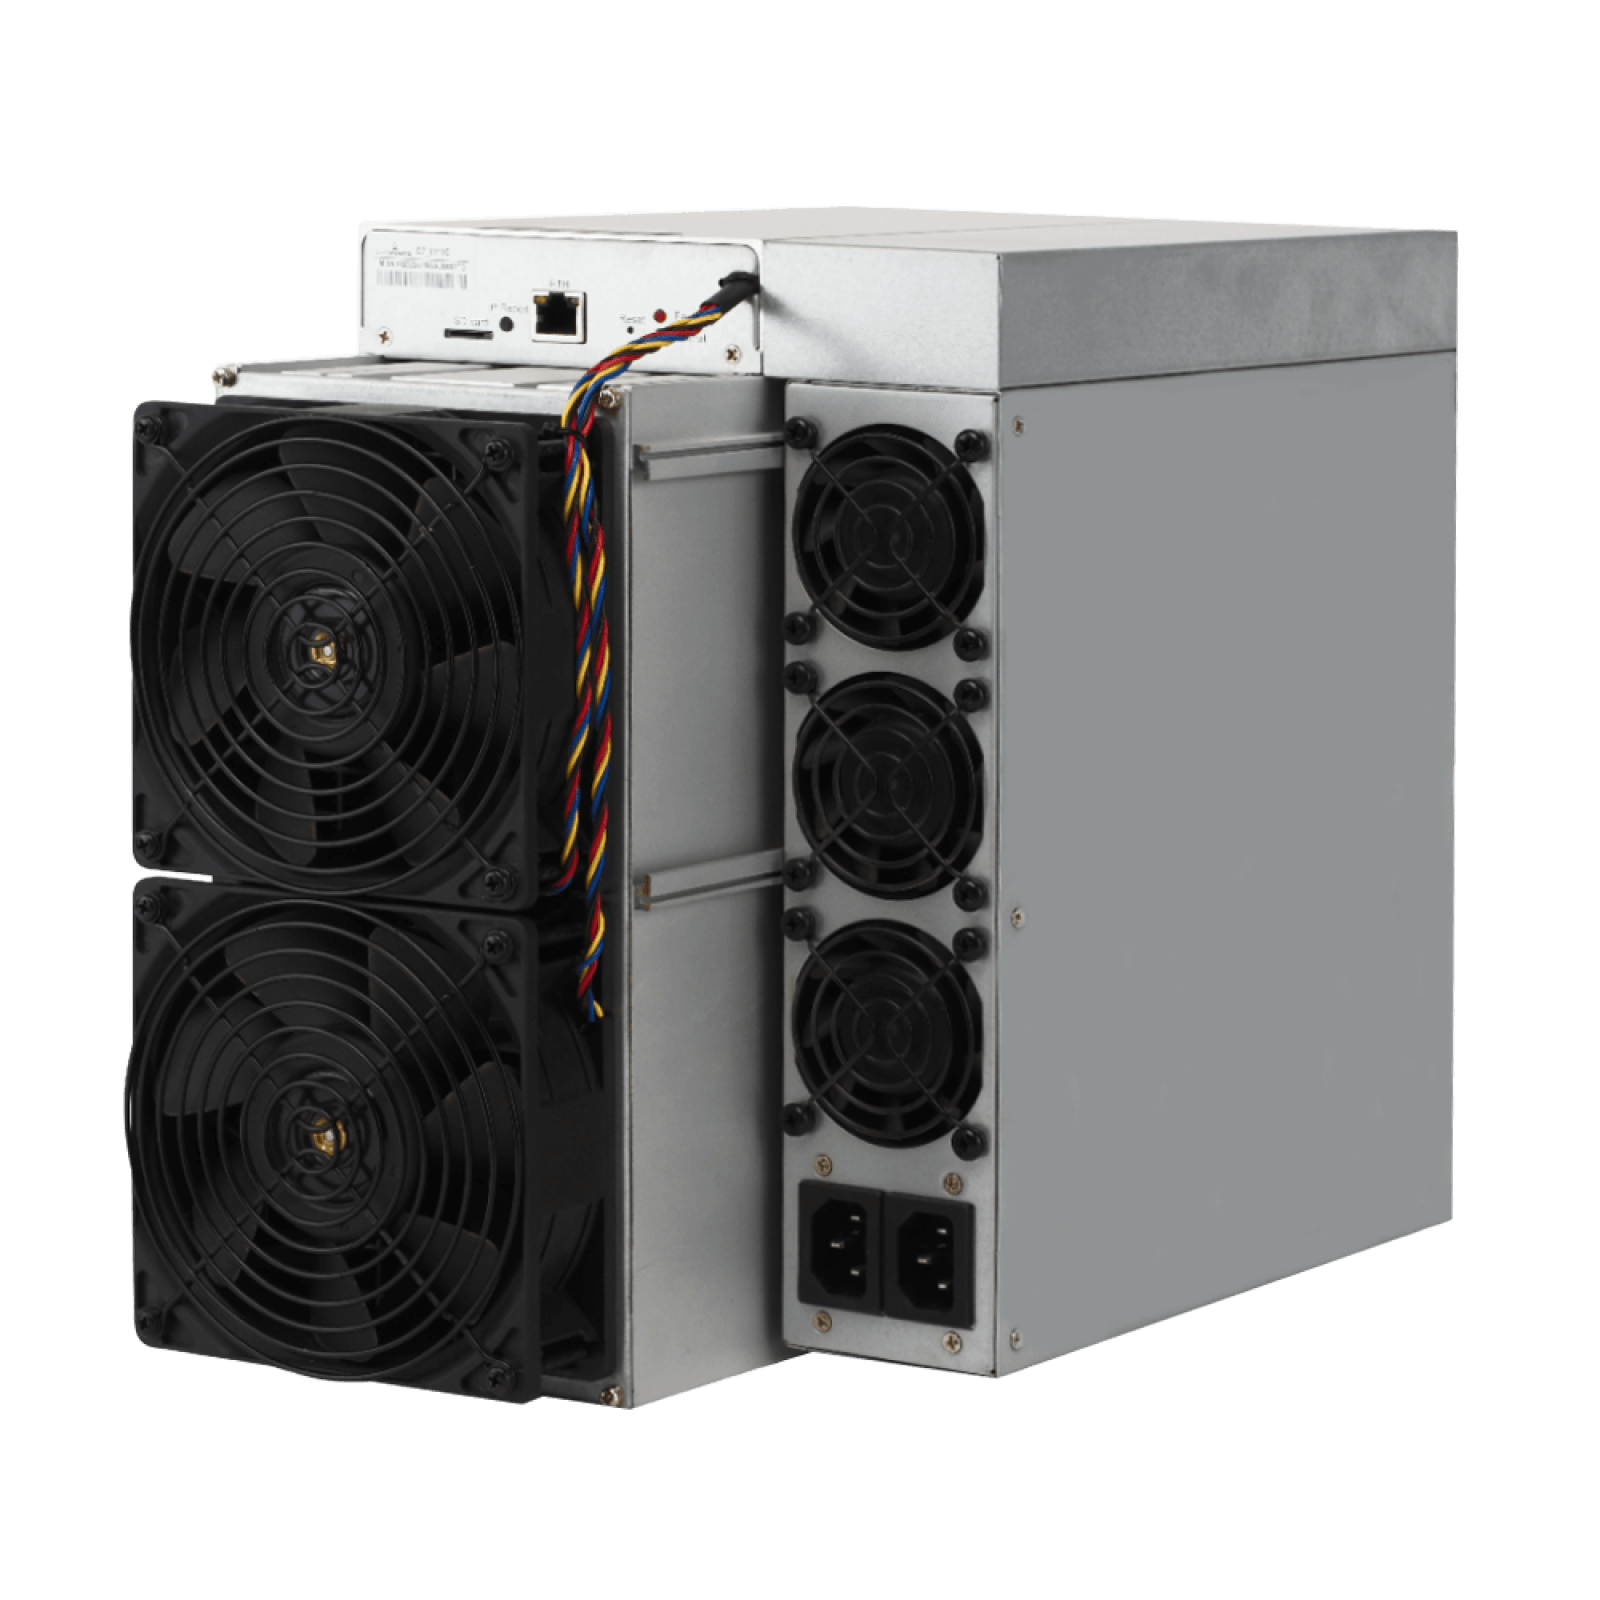 Antminer t21 190 th s